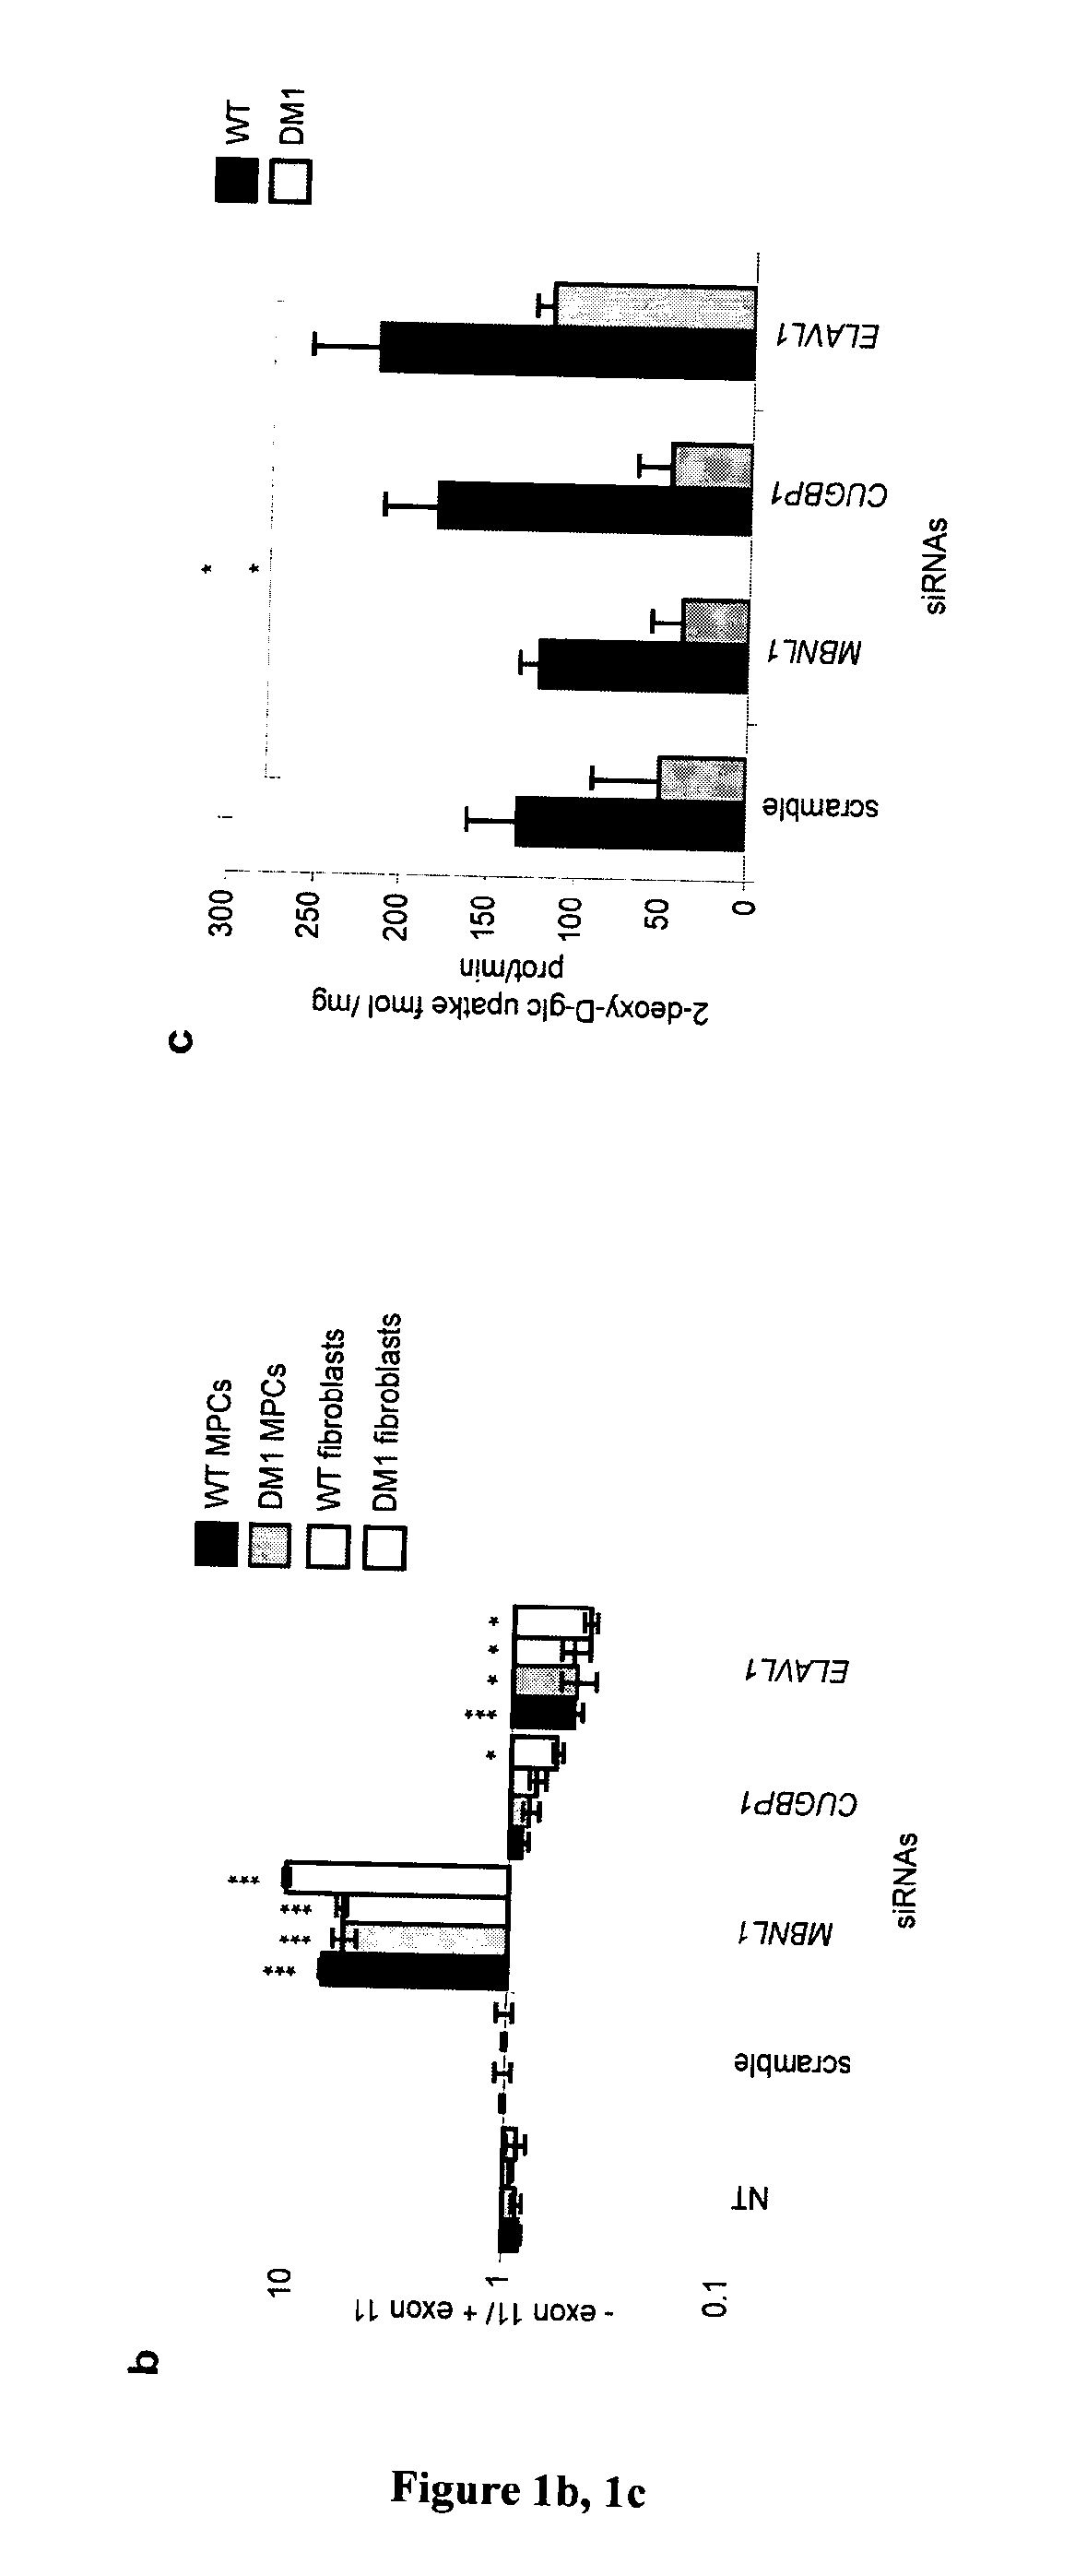 Methods and compositions comprising ampk activator (metformin/troglitazone) for the treatment of myotonic dystrophy type 1 (DM1)